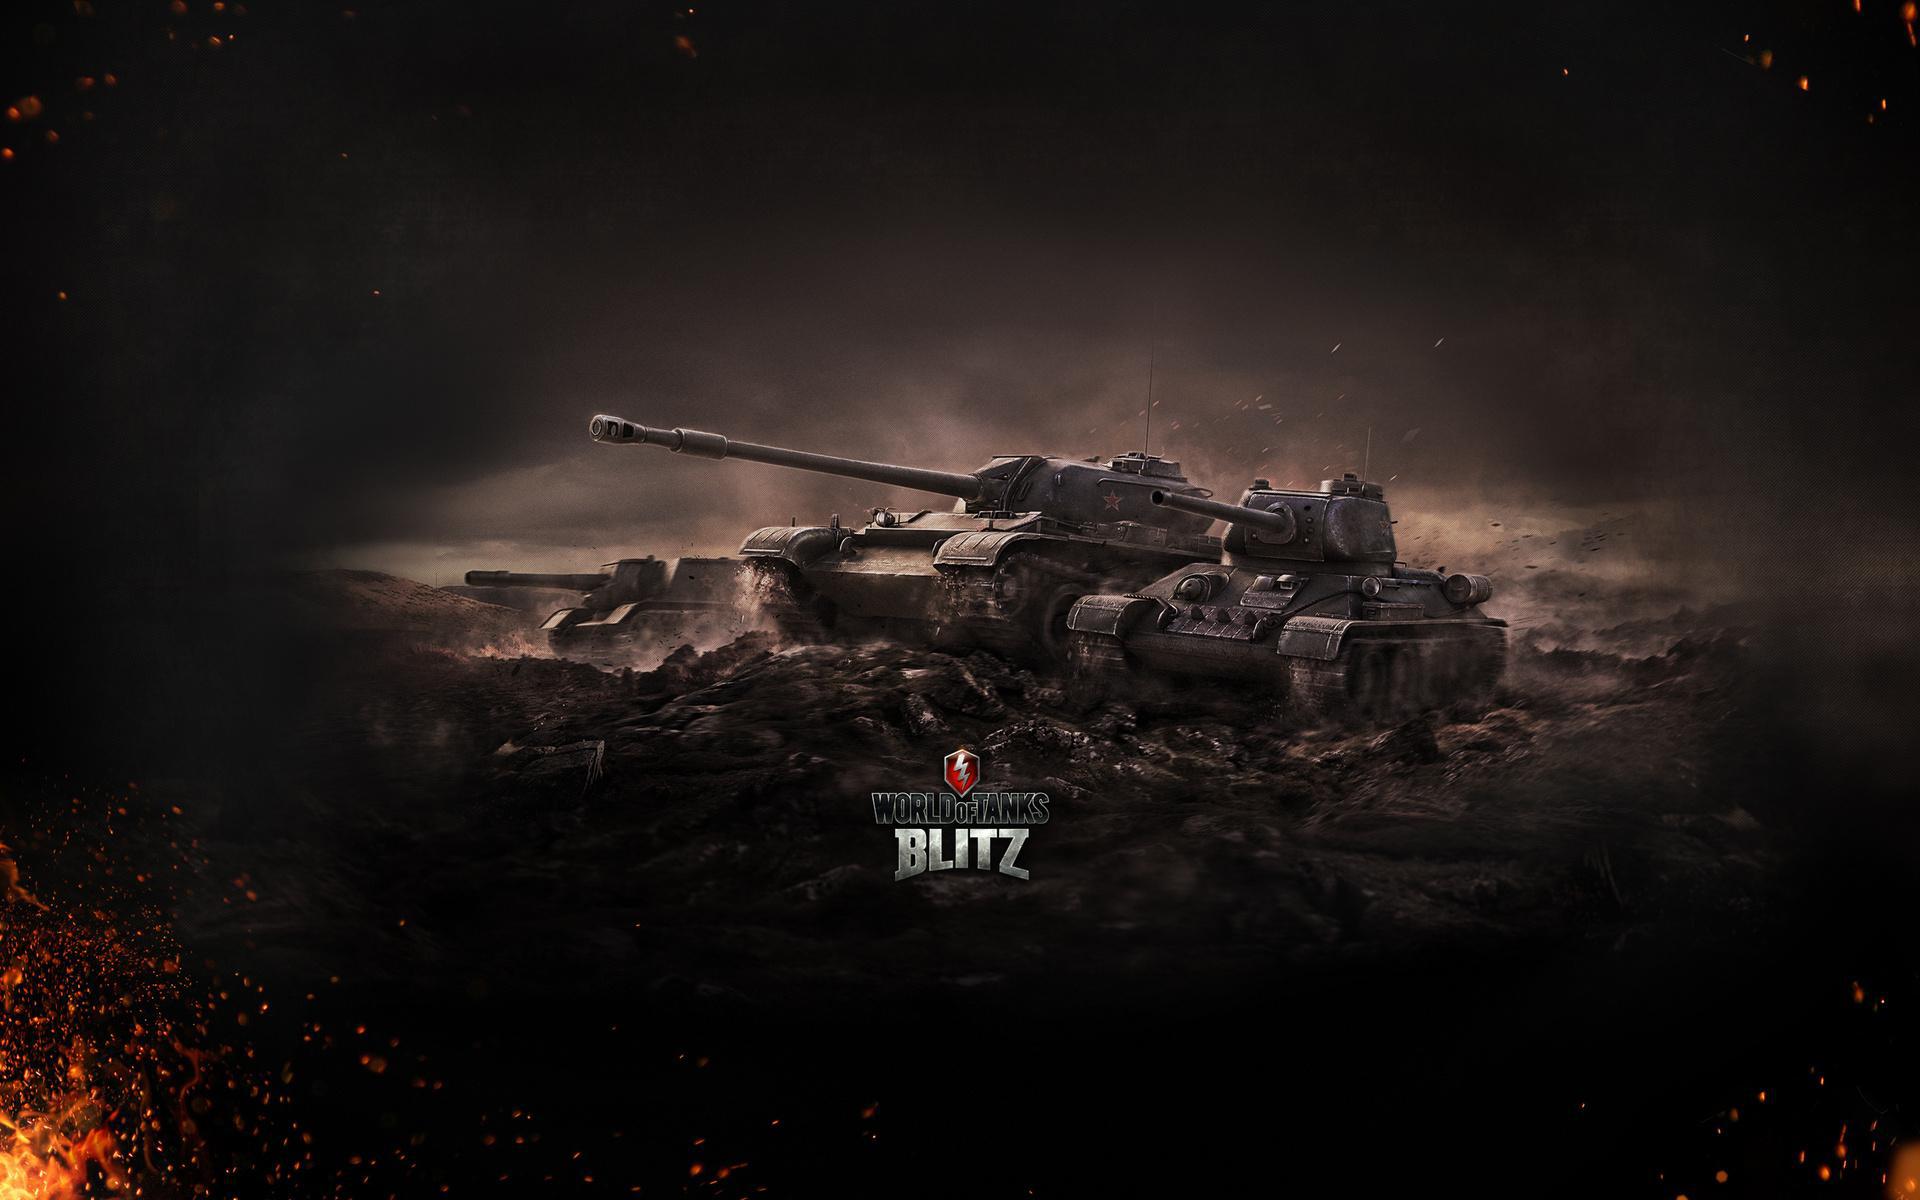 wot blitz wallpaper,strategy video game,sky,darkness,space,pc game